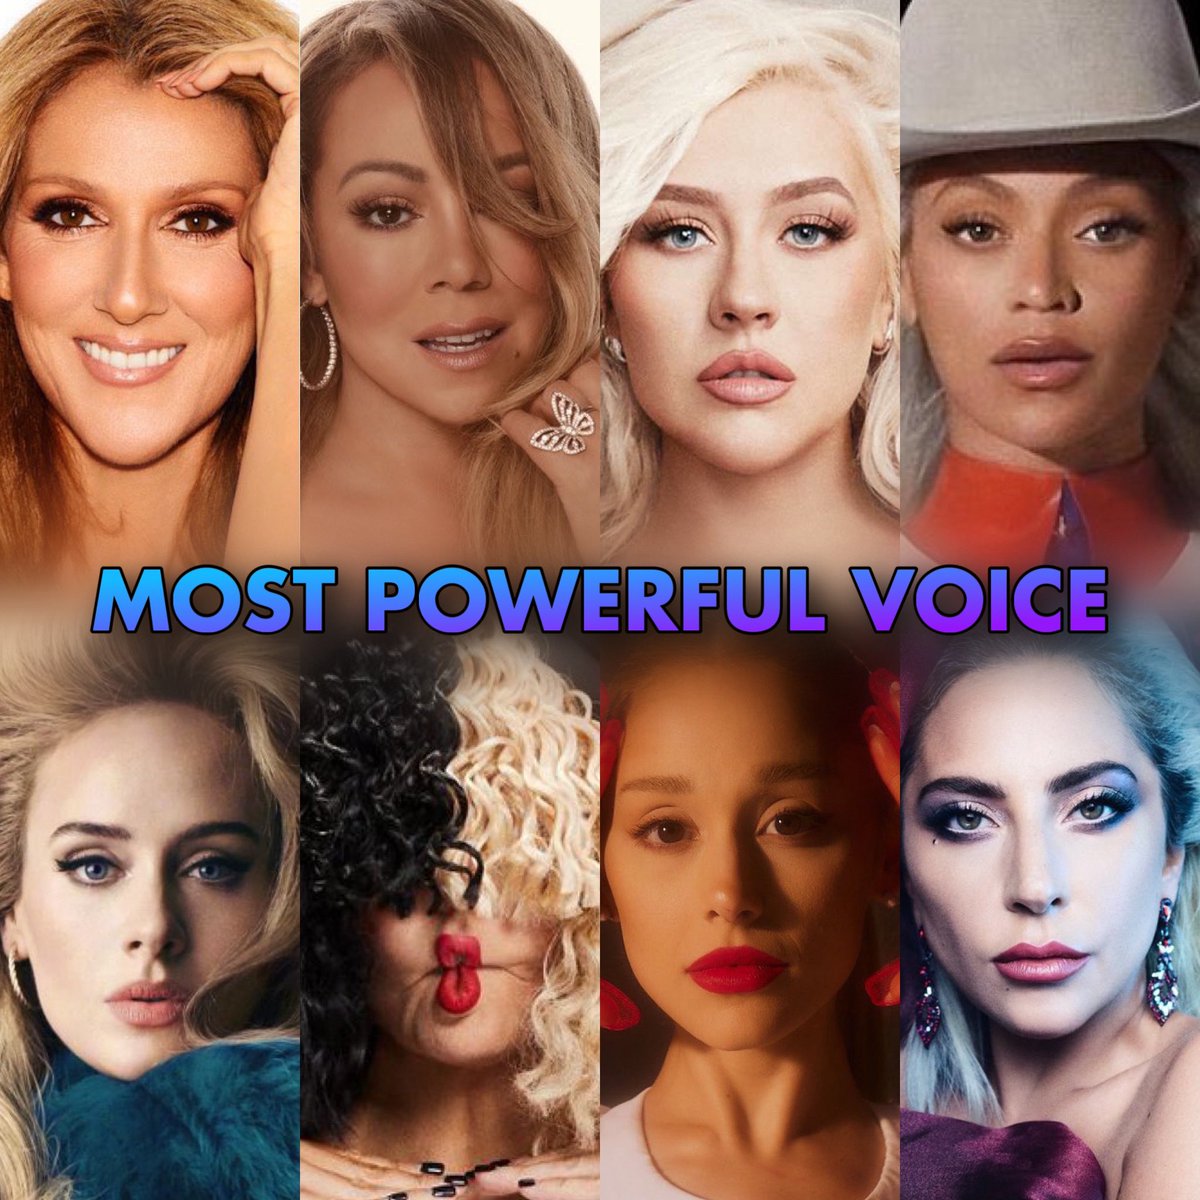 Which of these artists has the most powerful voice ?